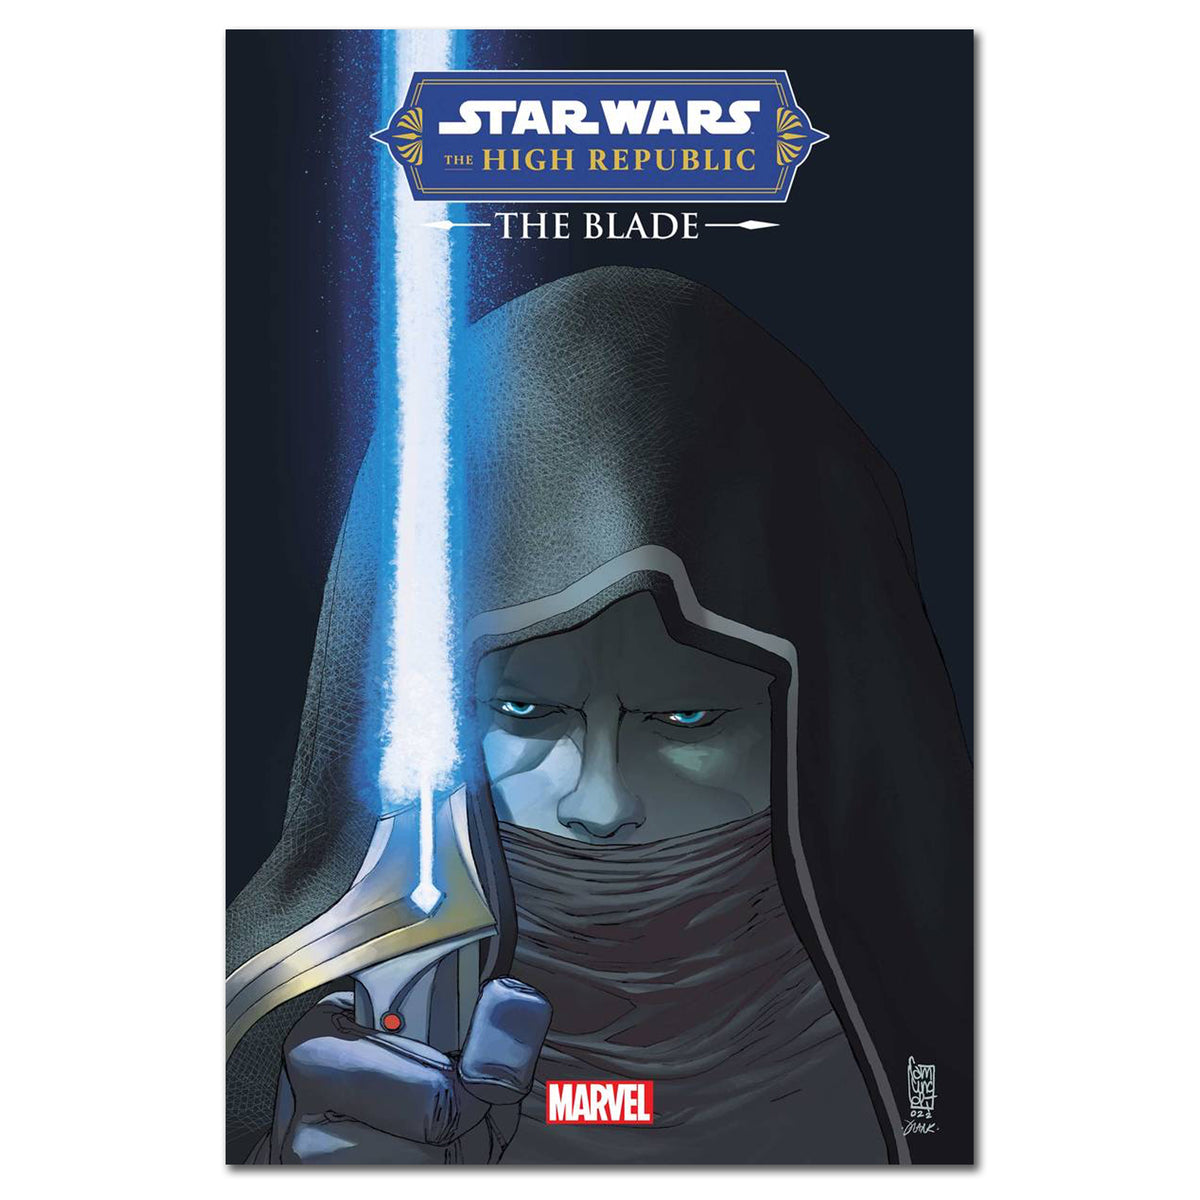 Star Wars The High Republic The Blade #1 (of 4) CAMUNCOLI FINALSALE